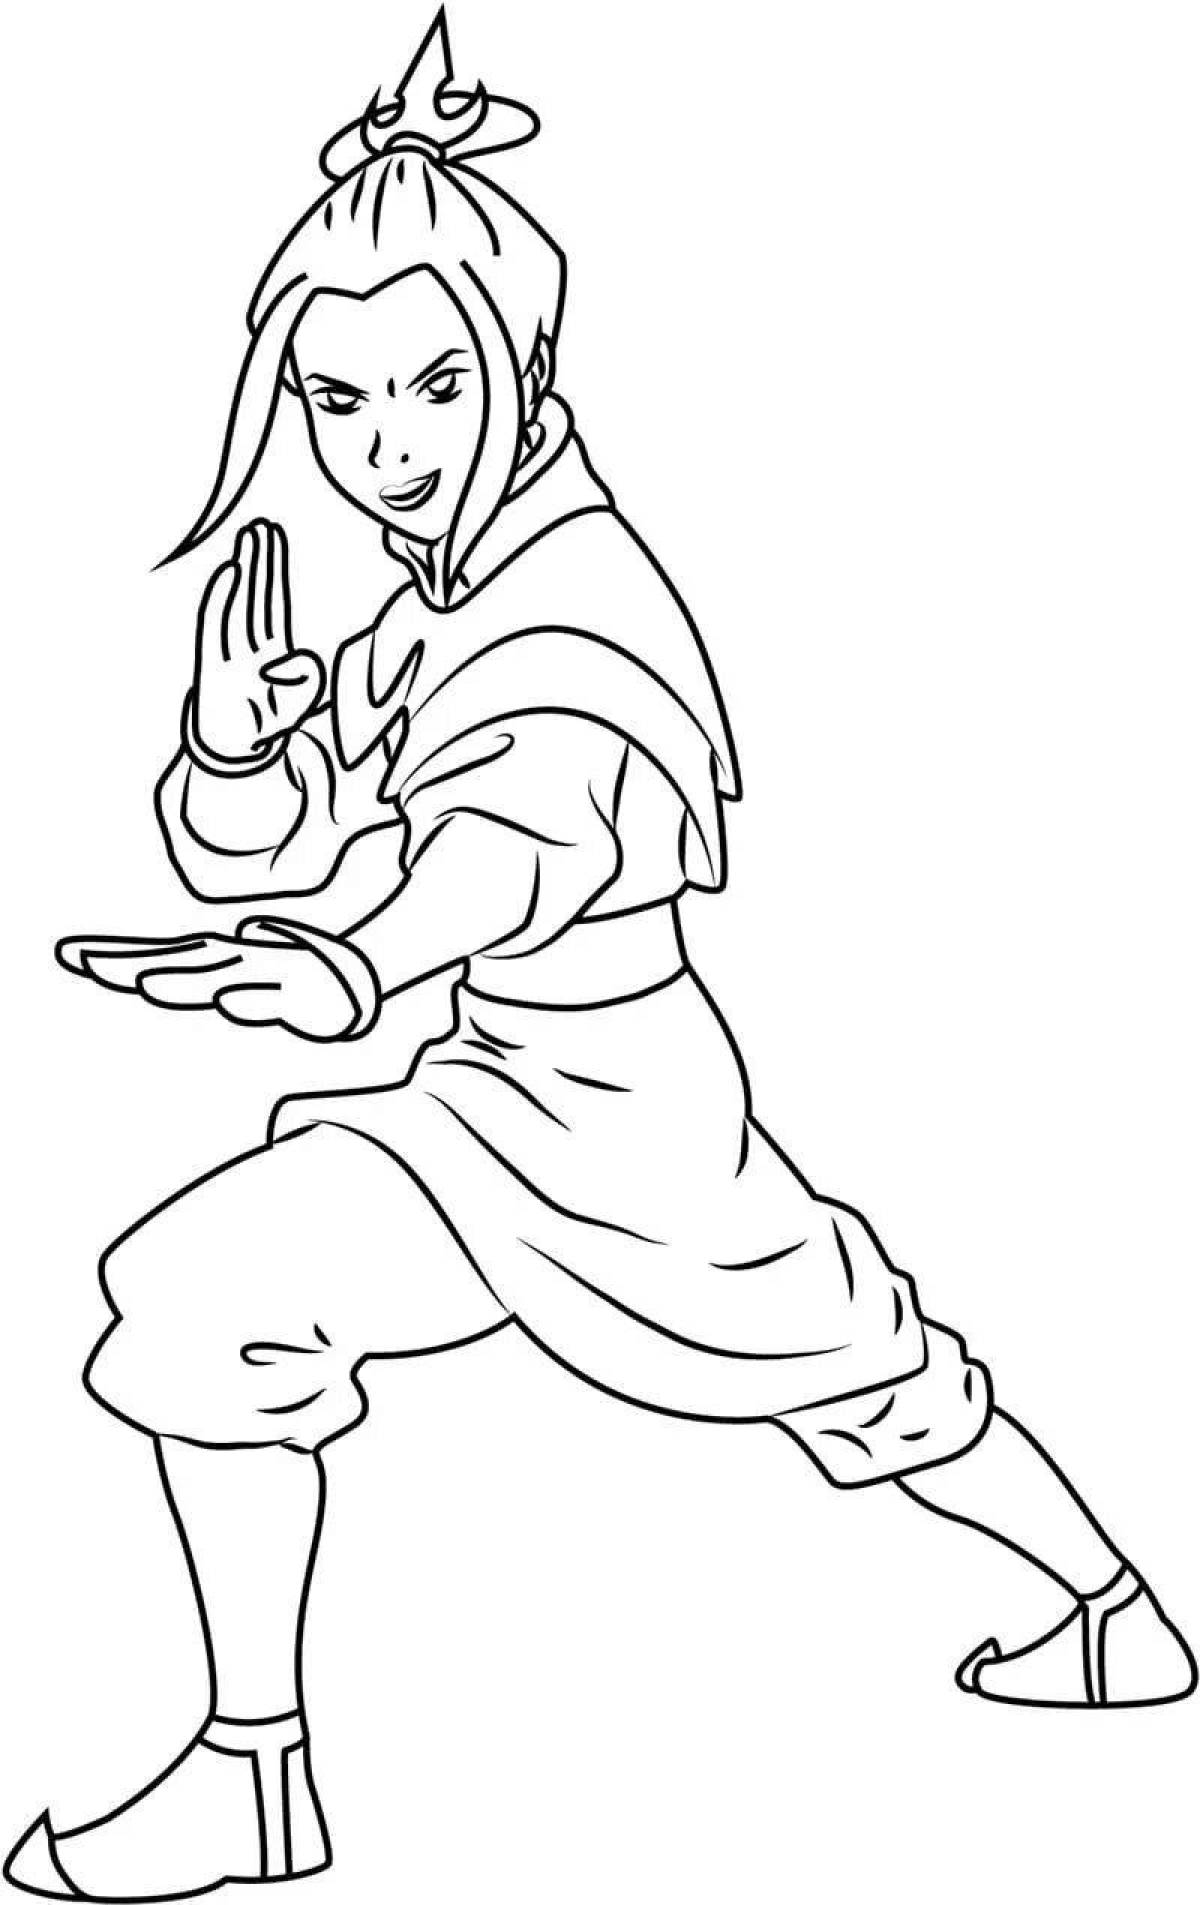 Glorious Avatar: The Last Airbender Coloring Page